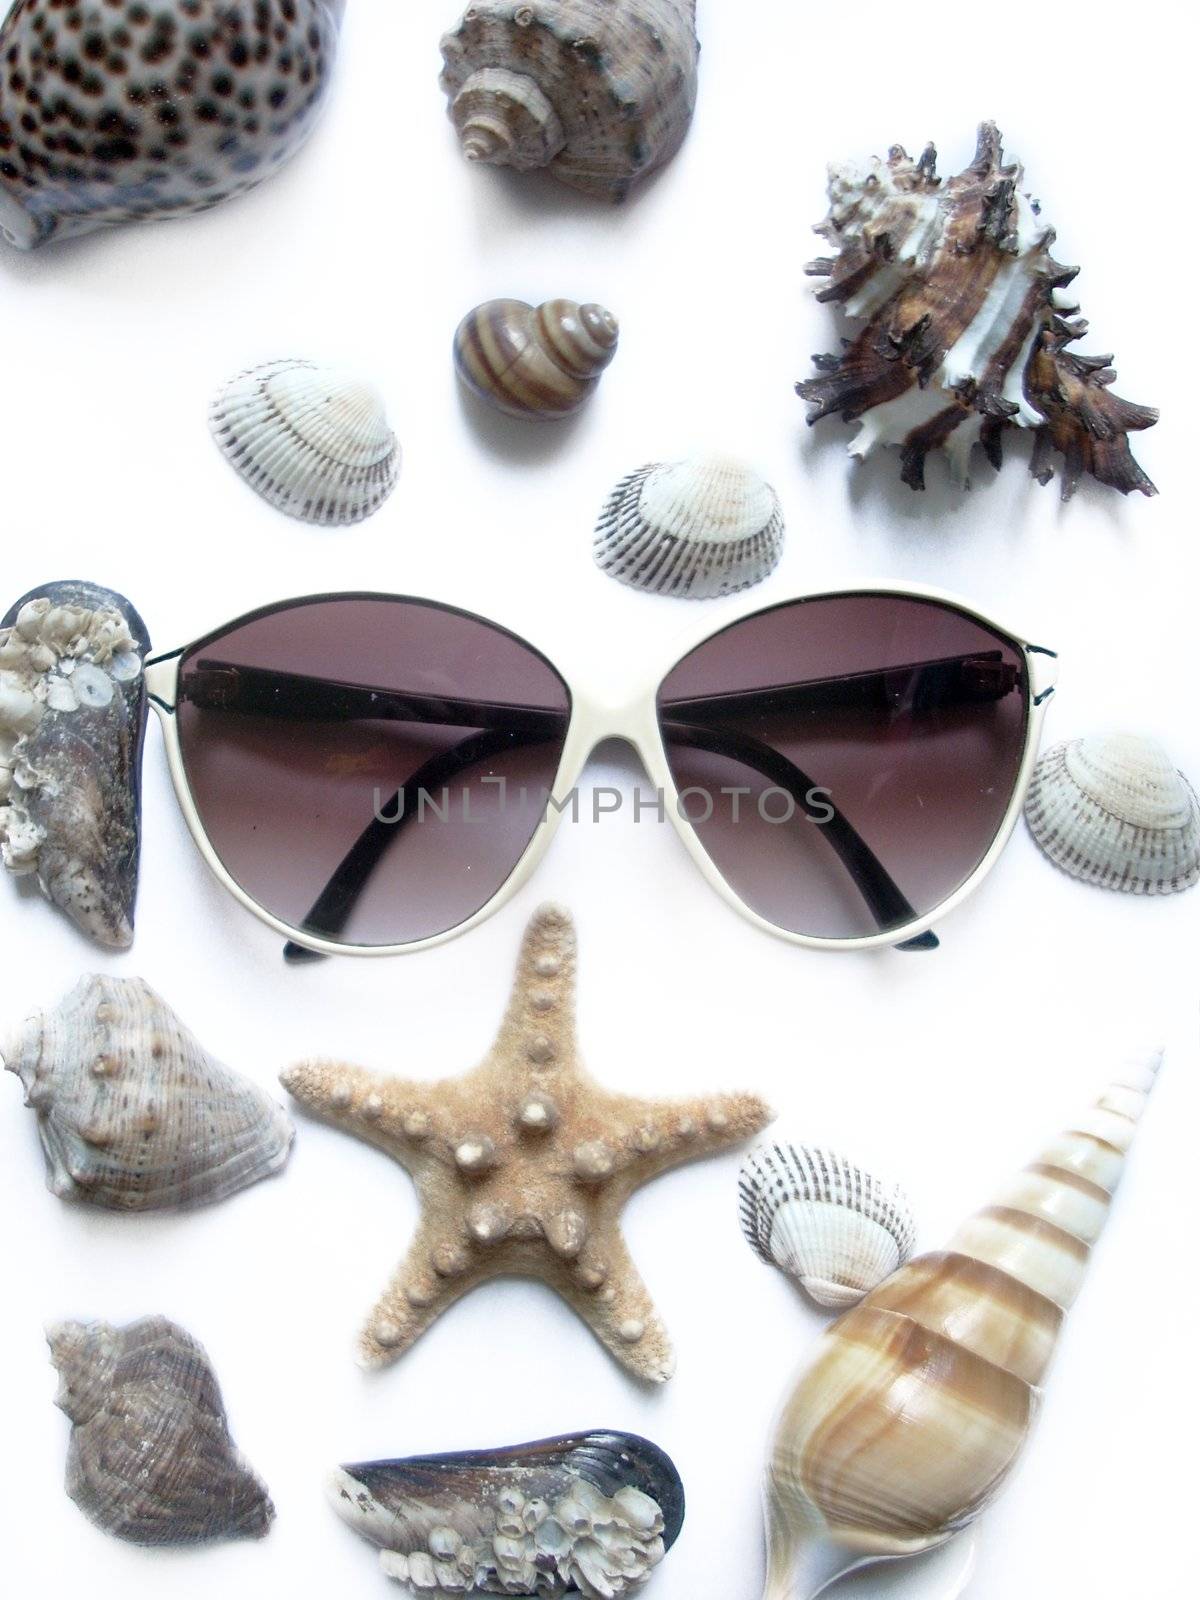 solar glasses and different seashells by DOODNICK